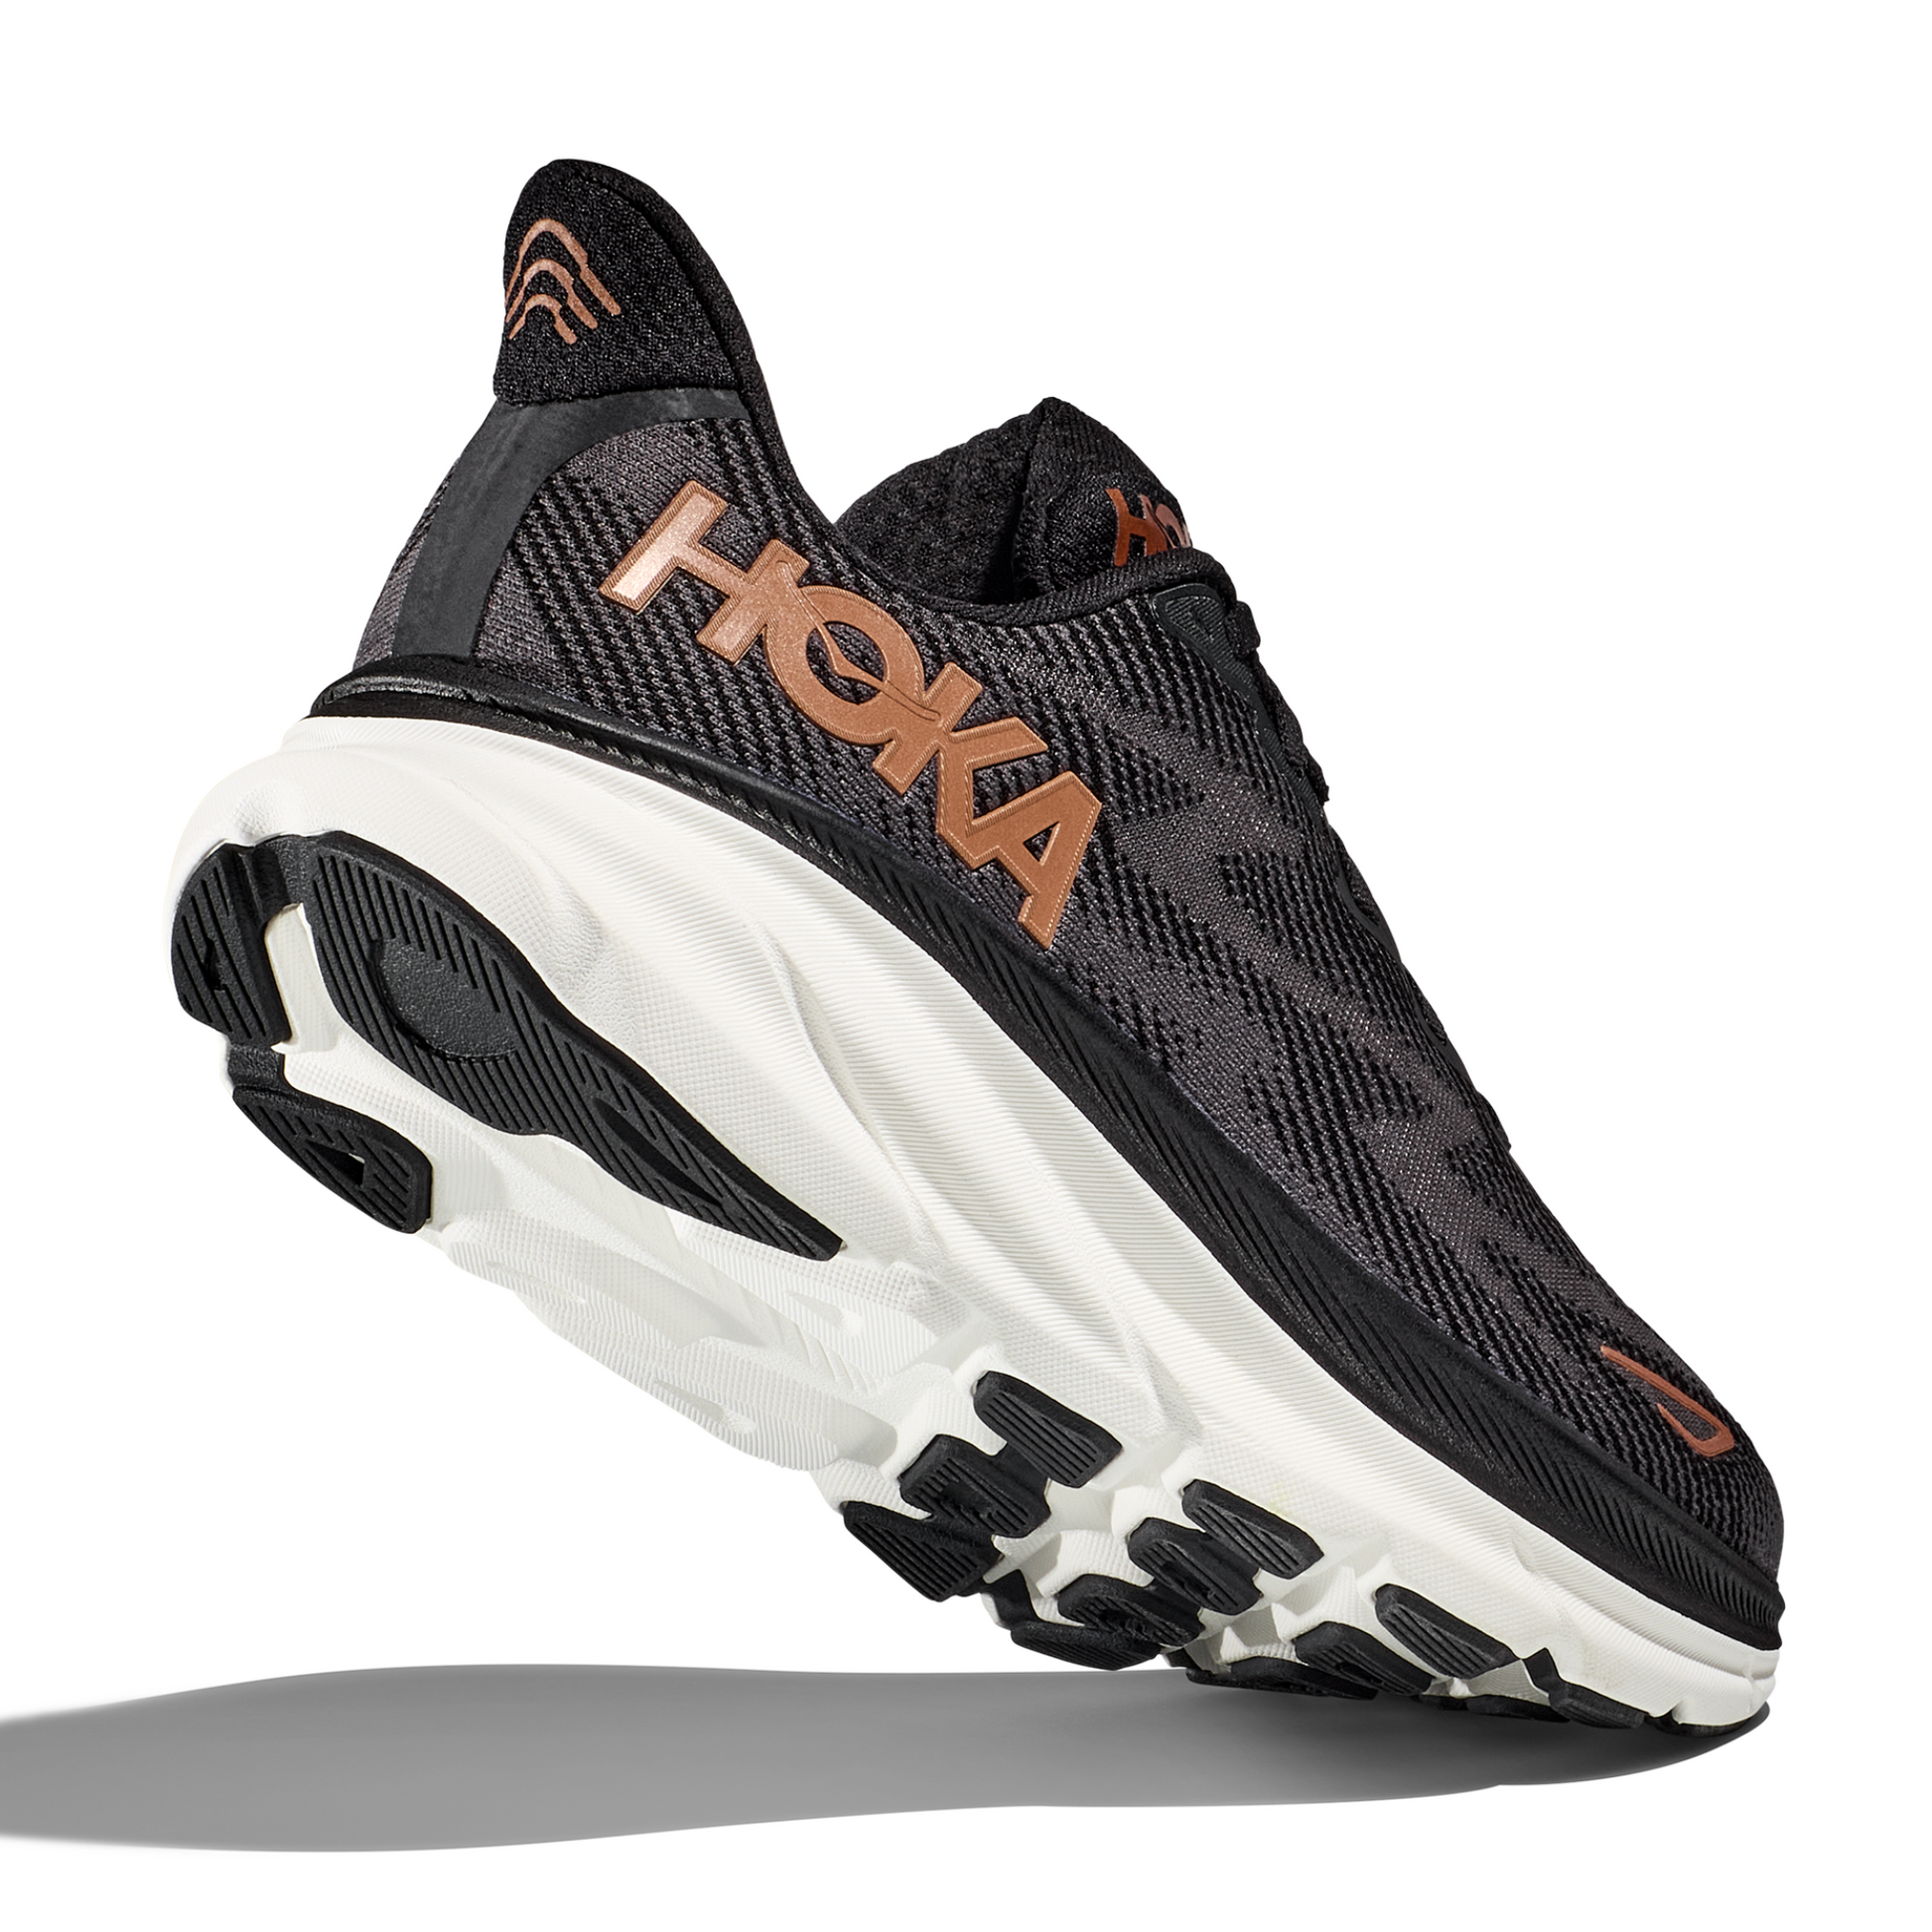 Tenis Running HOKA Clifton 9 Mujer Negros | Outdoor Adventure Colombia